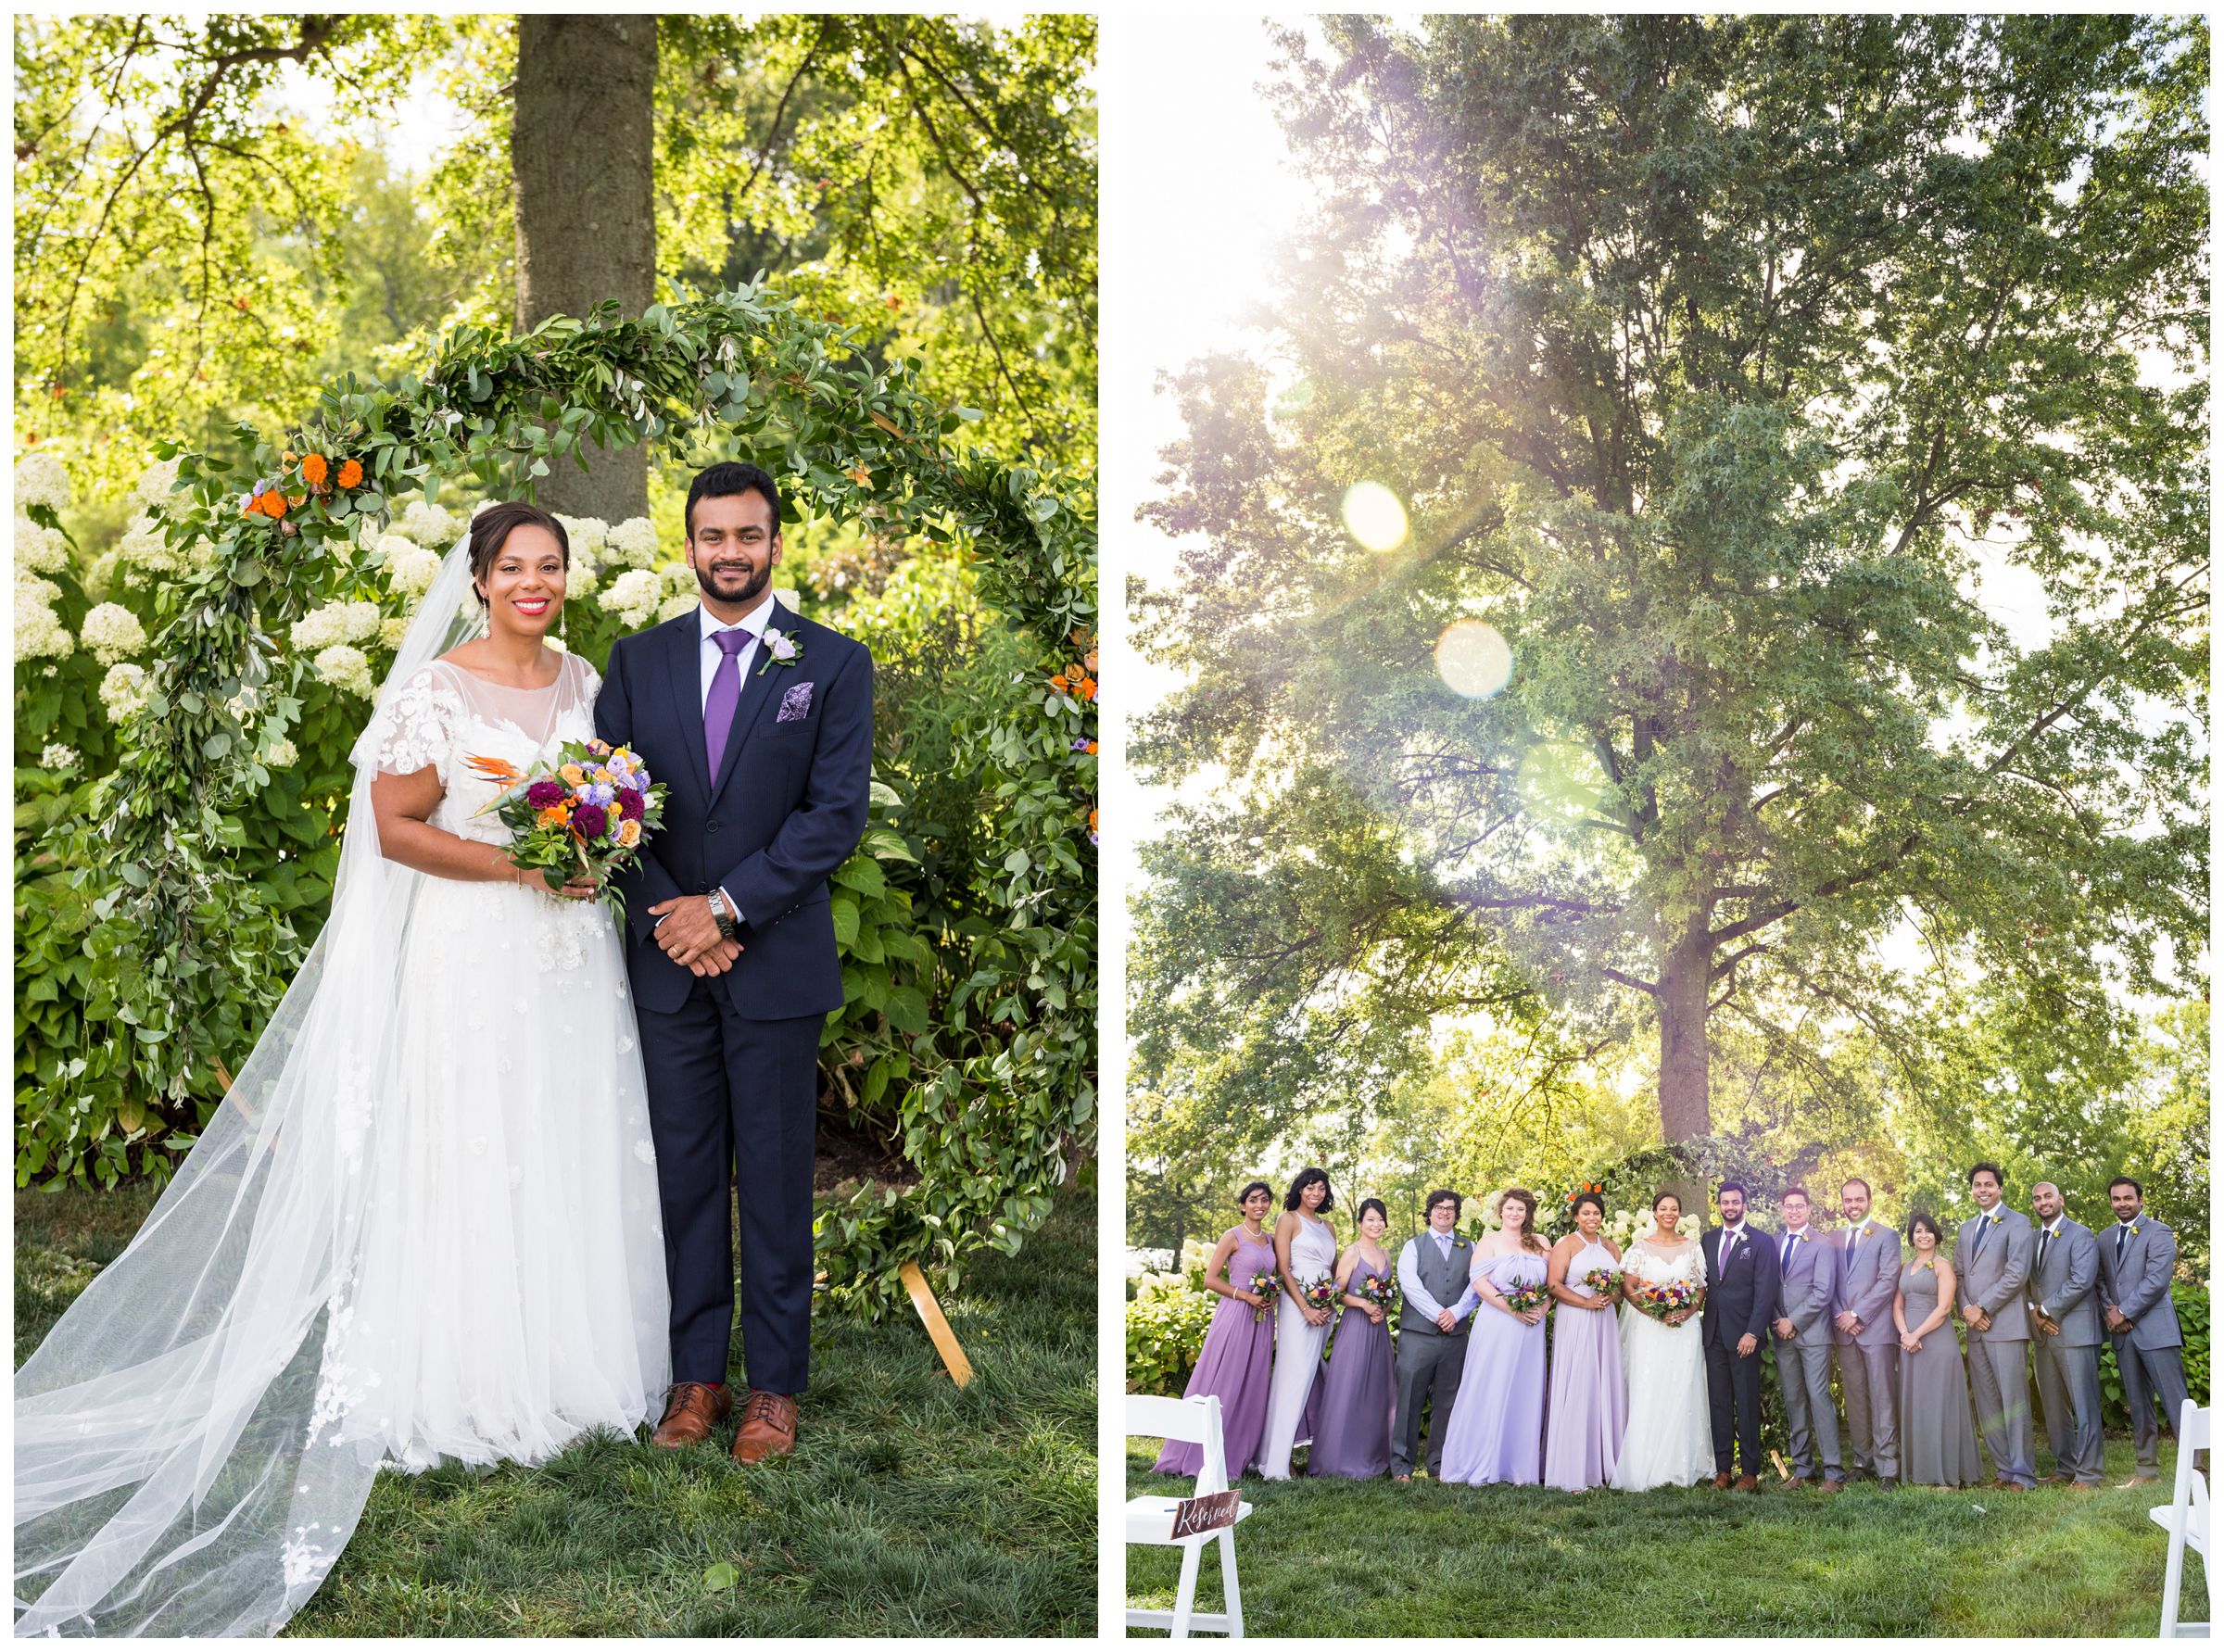 bride and groom with diverse wedding party with lilac purple, blue and gold color scheme